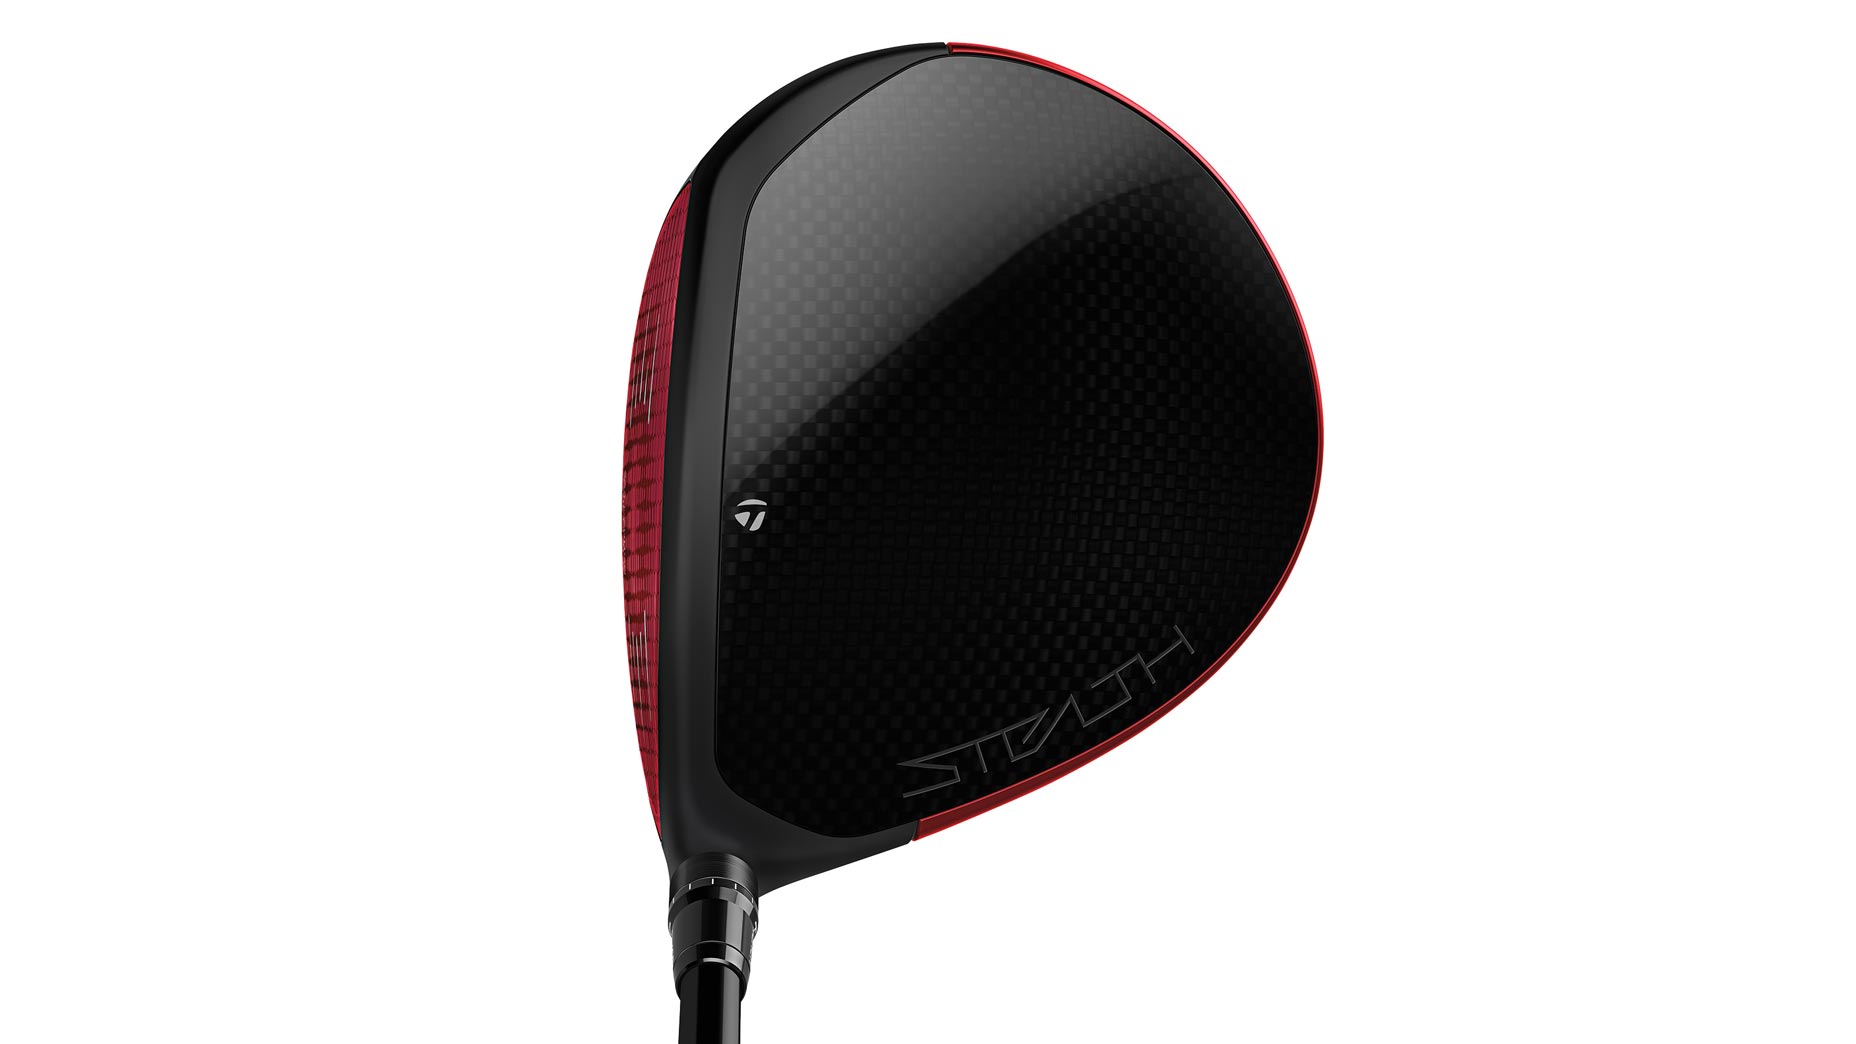 taylormade stealth 2 driver address 1856